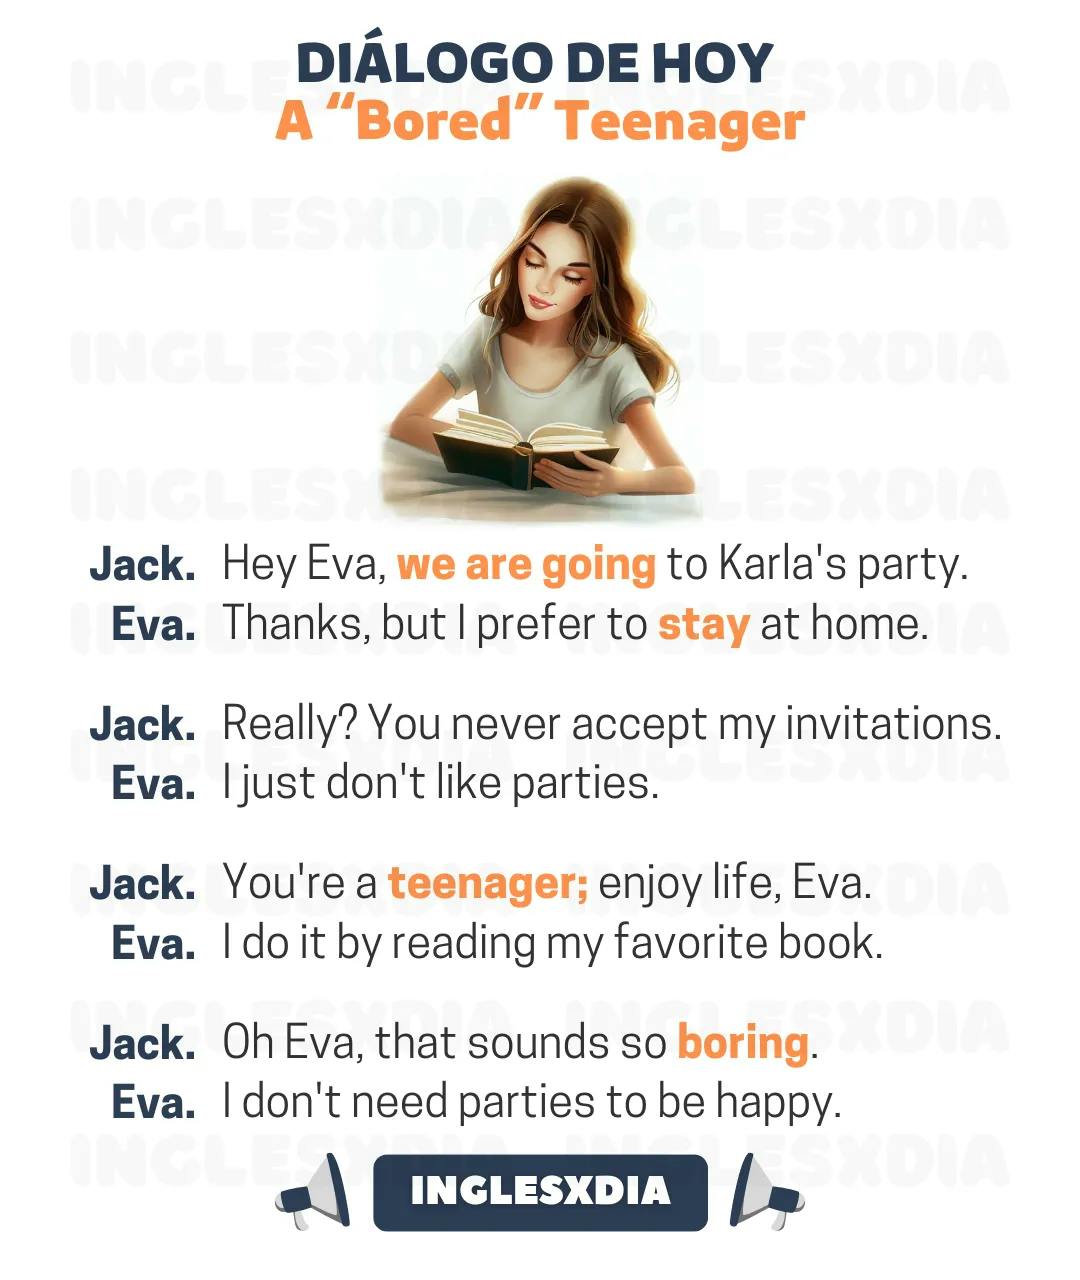 A “Bored” Teenager